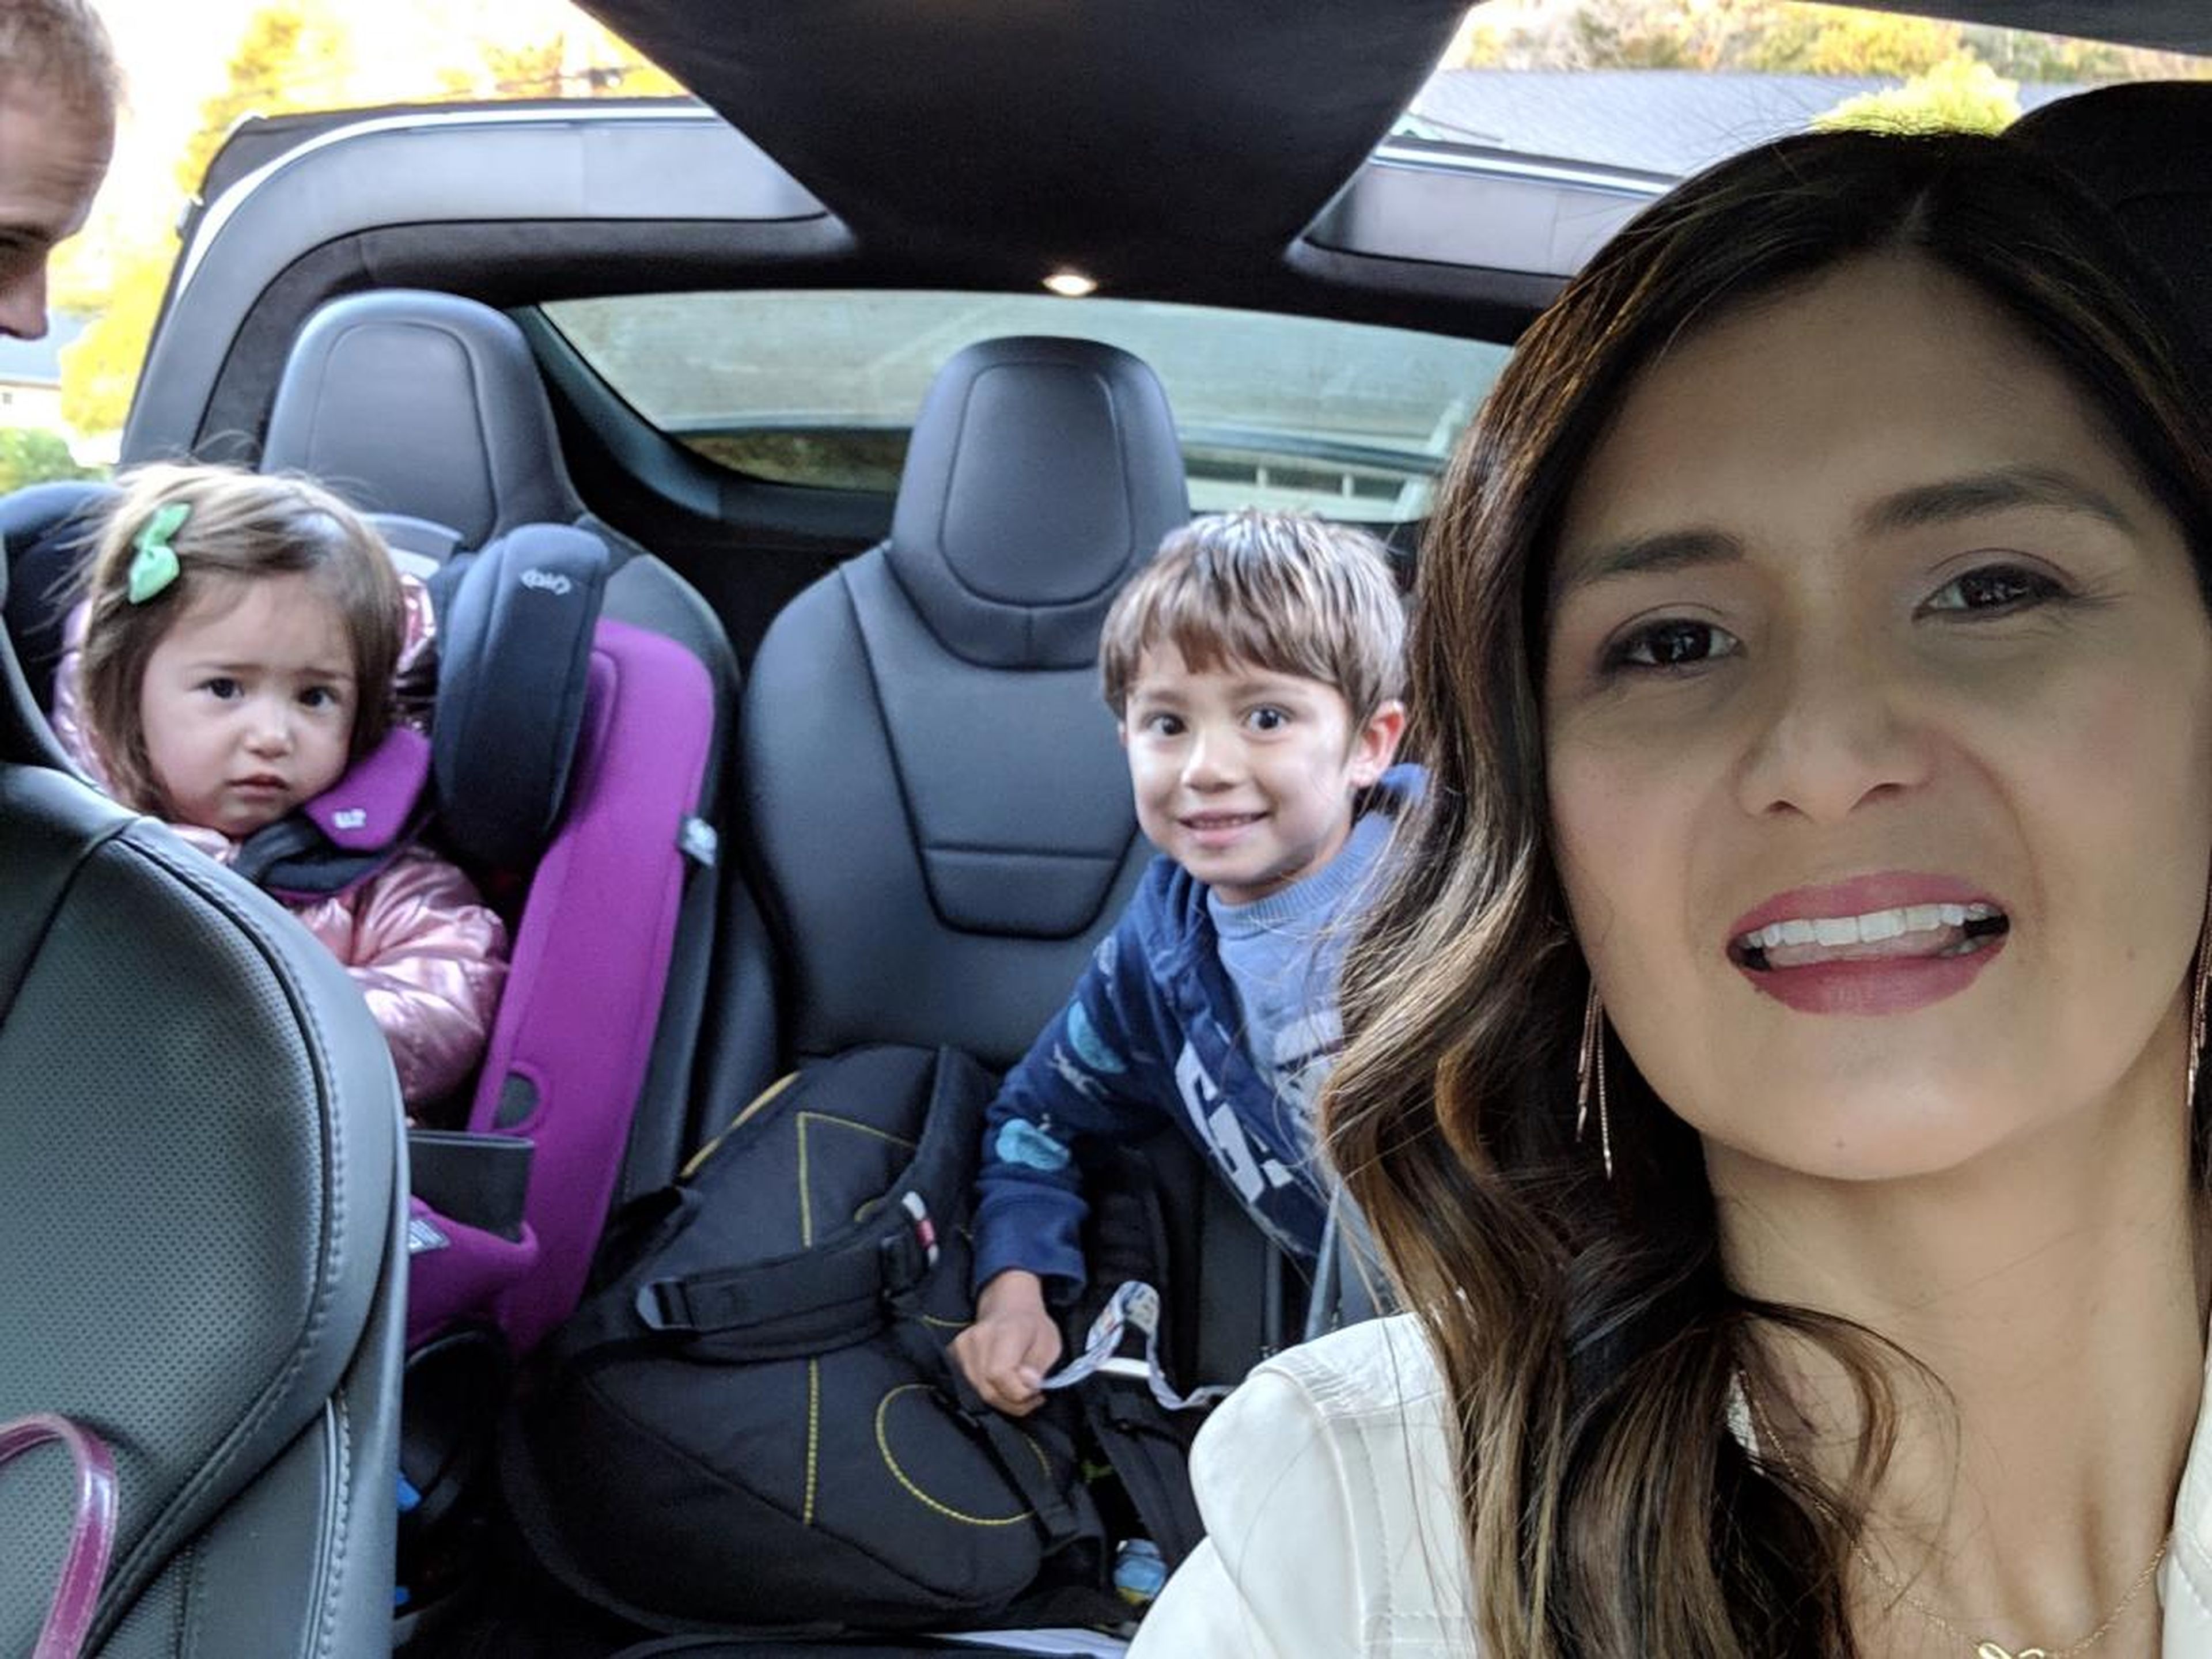 Rincon drives her kids to school — and they both love to request songs during the ride, she said.